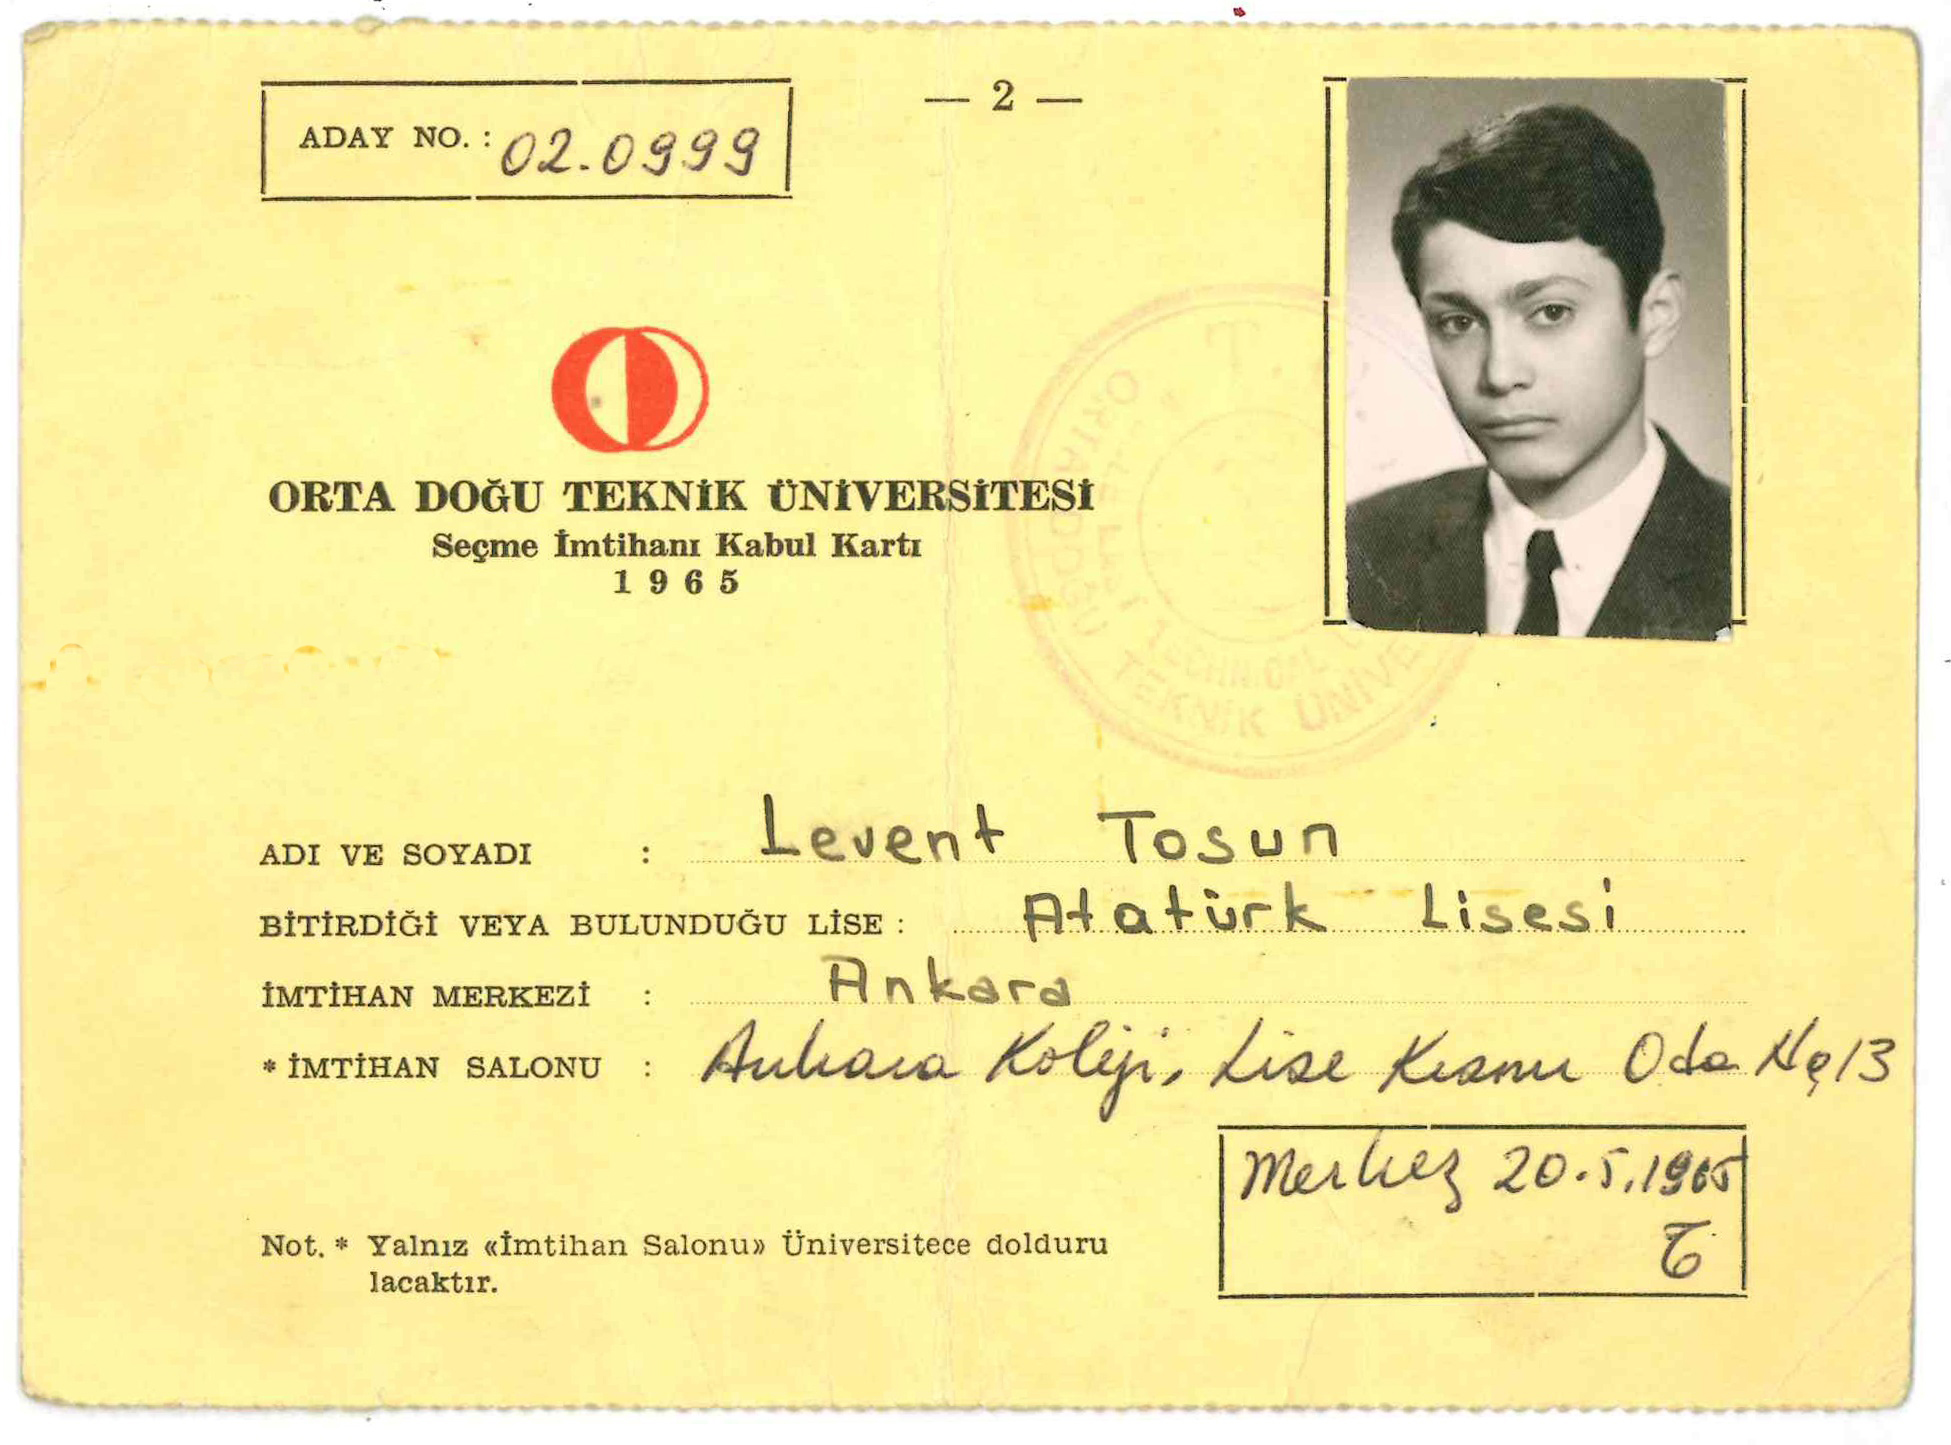 Middle East Technical University selection exam acceptance card (1965)